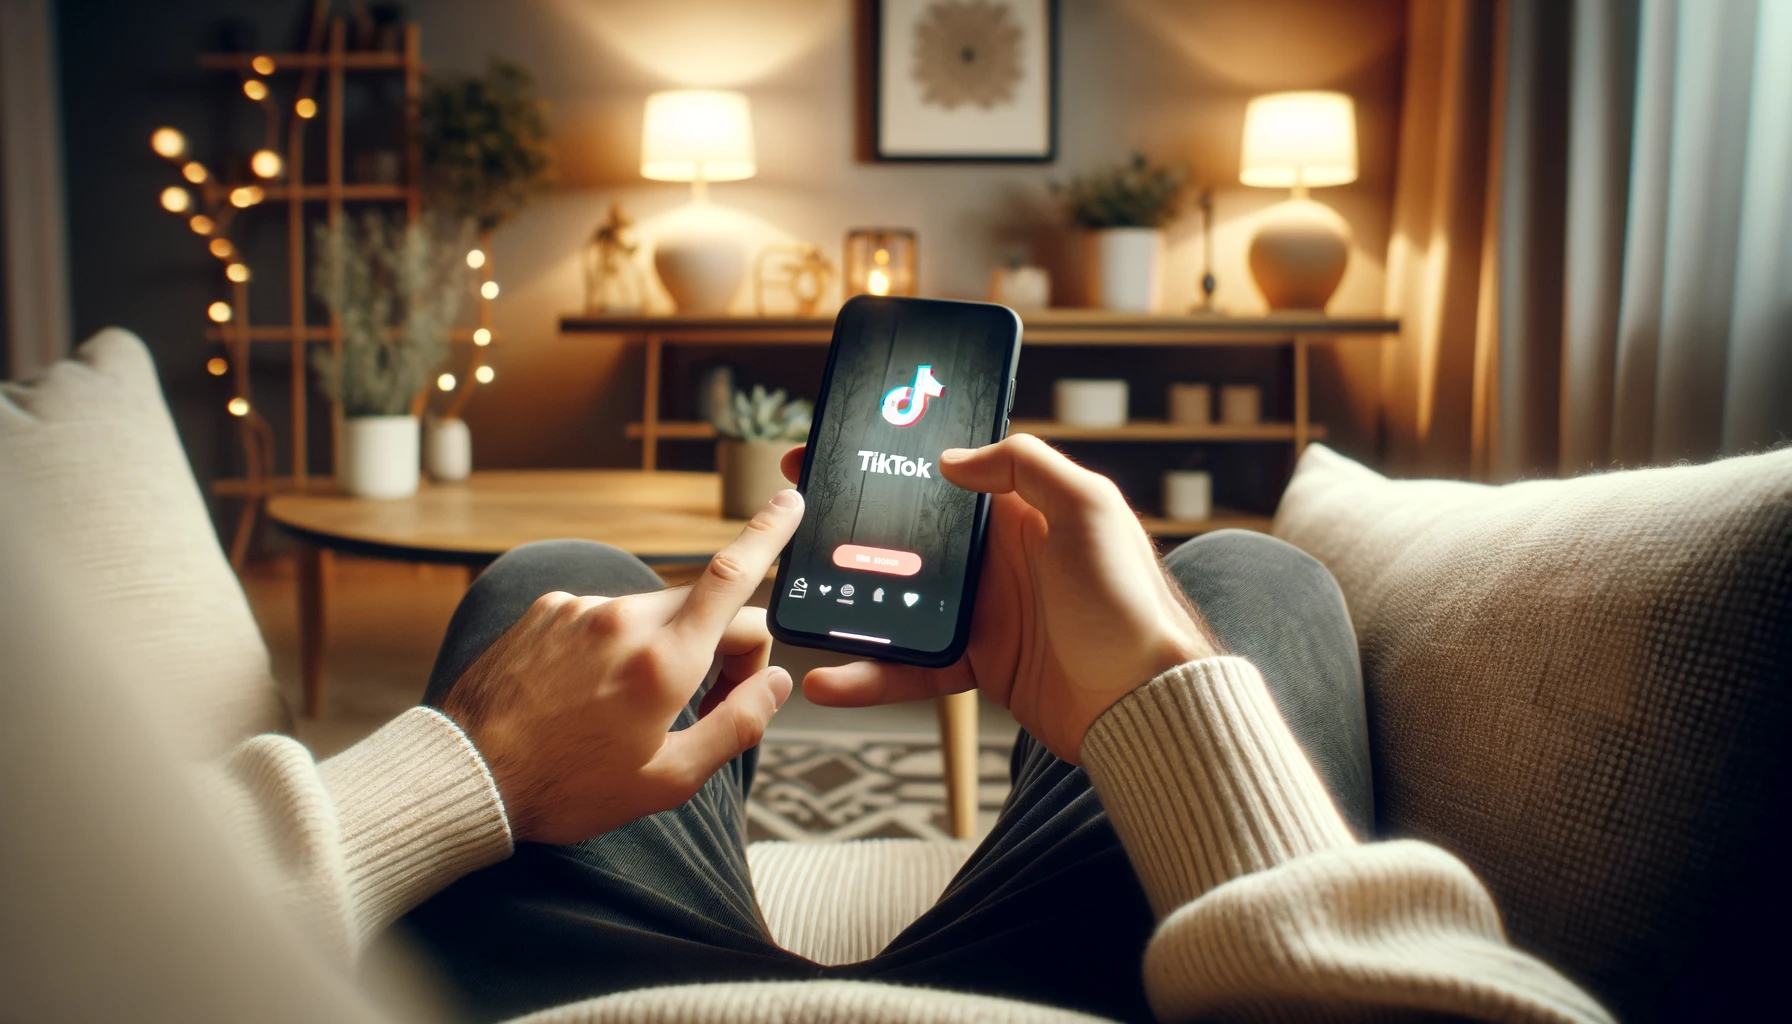 A person using TikTok on a smartphone. The scene is in a cozy living room with soft lighting. The person is sitting on a comfortable sofa, holding the